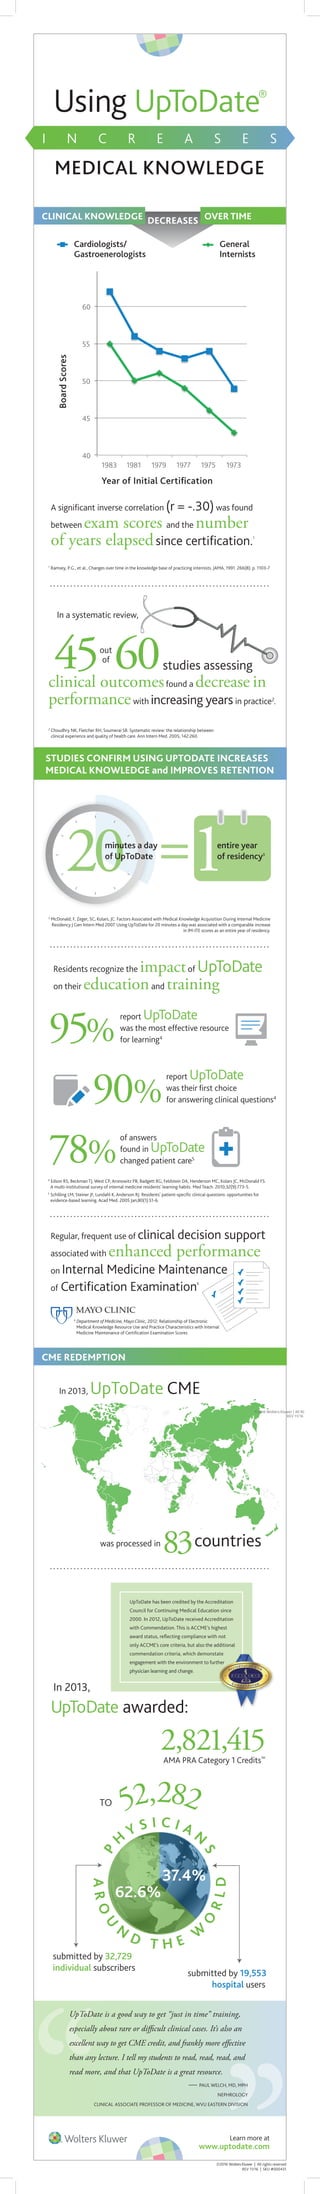 CLINICAL KNOWLEDGE DECREASES OVER TIME
UpToDate is a good way to get “just in time” training,
than any lecture. I tell my students to read, read, read, and
read more, and that UpToDate is a great resource.
— PAUL WELCH, MD, MPH
NEPHROLOGY
CLINICAL ASSOCIATE PROFESSOR OF MEDICINE, WVU EASTERN DIVISION
Using UpToDate®
I N C R E A S E S
MEDICAL KNOWLEDGE
20 1=
2,821,415
TO
AMA PRA Category 1 Credits™
95%
report UpToDate
was the most effective resource
for learning4
90%
report UpToDate
was their ﬁrst choice
for answering clinical questions4
78%
of answers
found in UpToDate
changed patient care5
submitted by 19,553
hospital users
submitted by 32,729
individual subscribers
In 2013, UpToDate CME
In 2013,
UpToDate awarded:
Residents recognize the impactof UpToDate
on their educationand training
was processed in
83countries
Regular, frequent use of clinical decision support
associated with enhanced performance
on Internal Medicine Maintenance
of Certiﬁcation Examination6
minutes a day
of UpToDate
entire year
of residency3
P
H
Y S I C I A N
S
ARO
U
N
D T H E
W
O
RLD
52,282
62.6%
37.4%
CME REDEMPTION
STUDIES CONFIRM USING UPTODATE INCREASES
MEDICAL KNOWLEDGE and IMPROVES RETENTION
UpToDate has been credited by the Accreditation
Council for Continuing Medical Education since
2000. In 2012, UpToDate received Accreditation
with Commendation. This is ACCME’s highest
award status, reﬂecting compliance with not
only ACCME’s core criteria, but also the additional
commendation criteria, which demonstate
engagement with the environment to further
physician learning and change.
6
Department of Medicine, MayoClinic, 2012: Relationship of Electronic
Medical Knowledge Resource Use and Practice Characteristics with Internal
Medicine Maintenance of Certiﬁcation Examination Scores
3
McDonald, F, Zeger, SC, Kolars, JC. Factors Associated with Medical Knowledge Acquisition During Internal Medicine
Residency J Gen Intern Med 2007. Using UpToDate for 20 minutes a day was associated with a comparable increase
in IM-ITE scores as an entire year of residency.
4
Edson RS, Beckman TJ, West CP, Aronowitz PB, Badgett RG, Feldstein DA, Henderson MC, Kolars JC, McDonald FS.
A multi-institutional survey of internal medicine residents' learning habits. Med Teach. 2010;32(9):773-5.
5
Schilling LM, Steiner JF, Lundahl K, Anderson RJ. Residents' patient-speciﬁc clinical questions: opportunities for
evidence-based learning. Acad Med. 2005 Jan;80(1):51-6.
+
1
Ramsey, P.G., et al., Changes over time in the knowledge base of practicing internists. JAMA, 1991. 266(8): p. 1103-7
2
Choudhry NK, Fletcher RH, Soumerai SB. Systematic review: the relationship between
clinical experience and quality of health care. Ann Intern Med. 2005; 142:260.
Year of Initial Certiﬁcation
BoardScores
General
Internists
40
45
50
55
60
1983 1981 1979 1977 1975 1973
Cardiologists/
Gastroenerologists
A signiﬁcant inverse correlation (r = -.30)was found
between exam scores and the number
of years elapsedsince certiﬁcation.1
In a systematic review,
studies assessing
clinical outcomesfound a decrease in
performancewith increasing years in practice2
.
6045out
of
Learn more at
www.uptodate.com
©2016 Wolters Kluwer | All rights reserved
REV 11/16 | SKU #000431
©2016 Wolters Kluwer | All Rights Rese
REV 11/16 | SKU 000
 